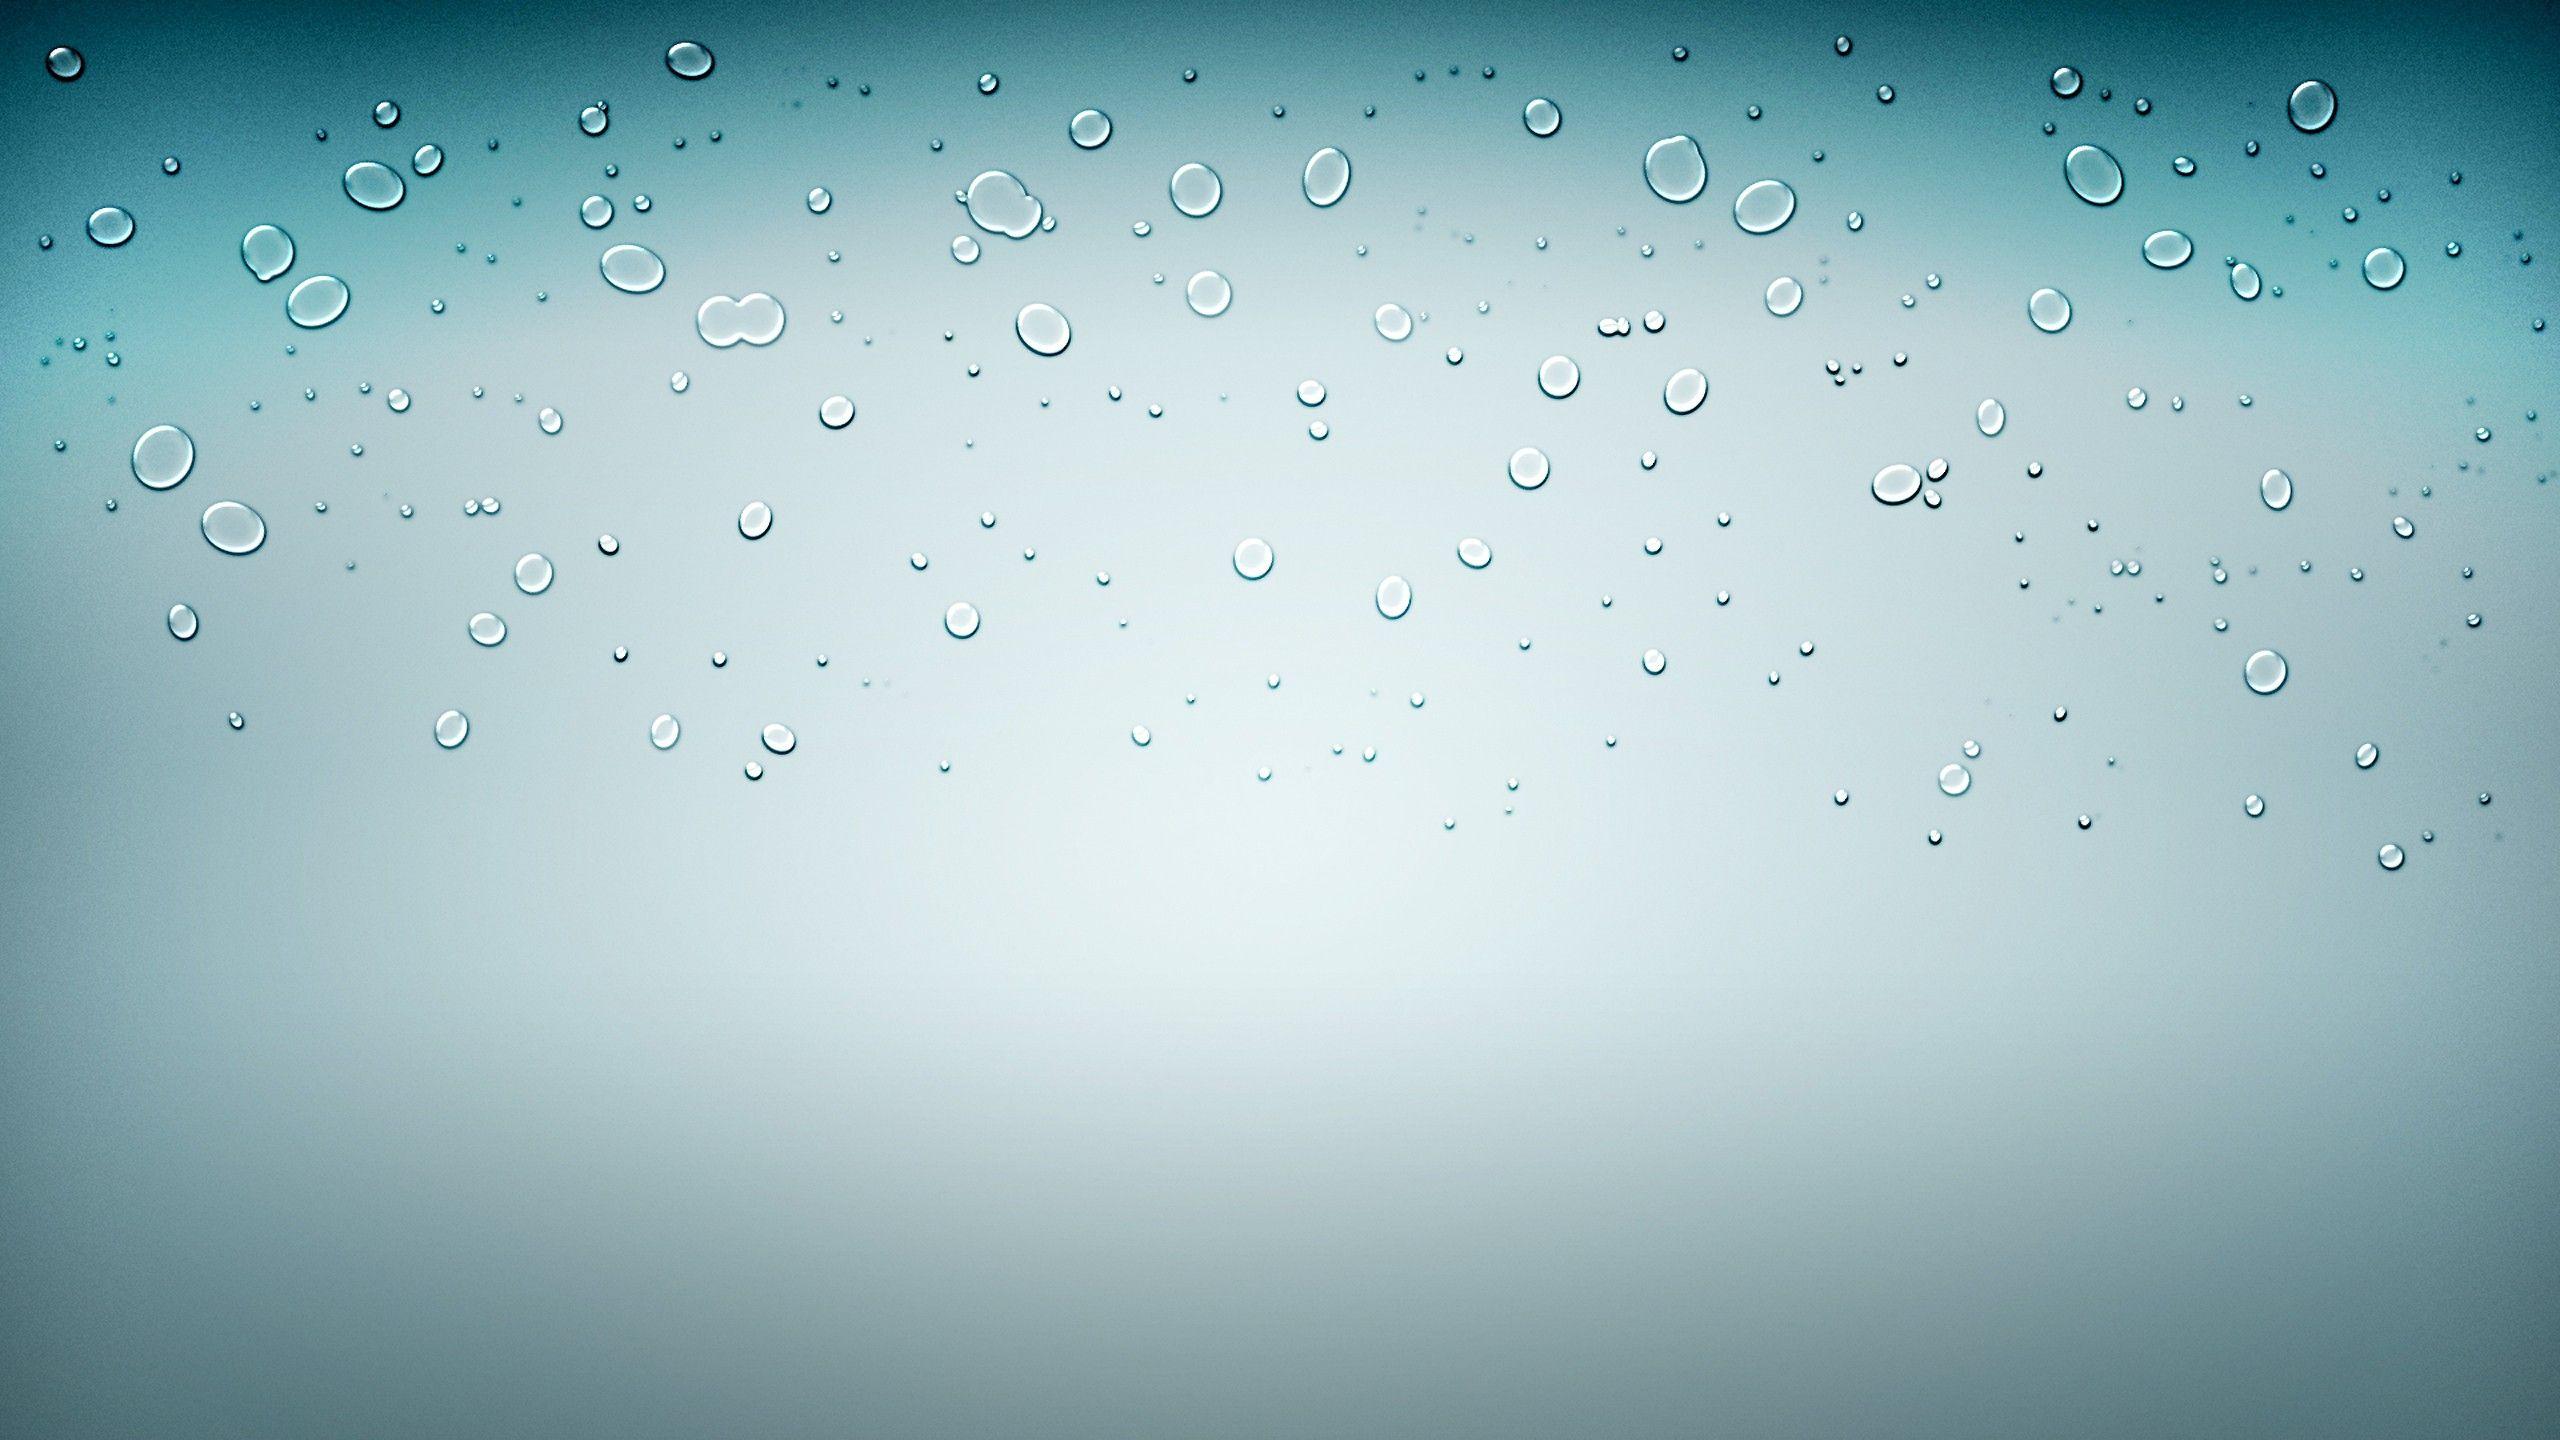 Daily Wallpaper: Minimal Water Drops. I Like To Waste My Time